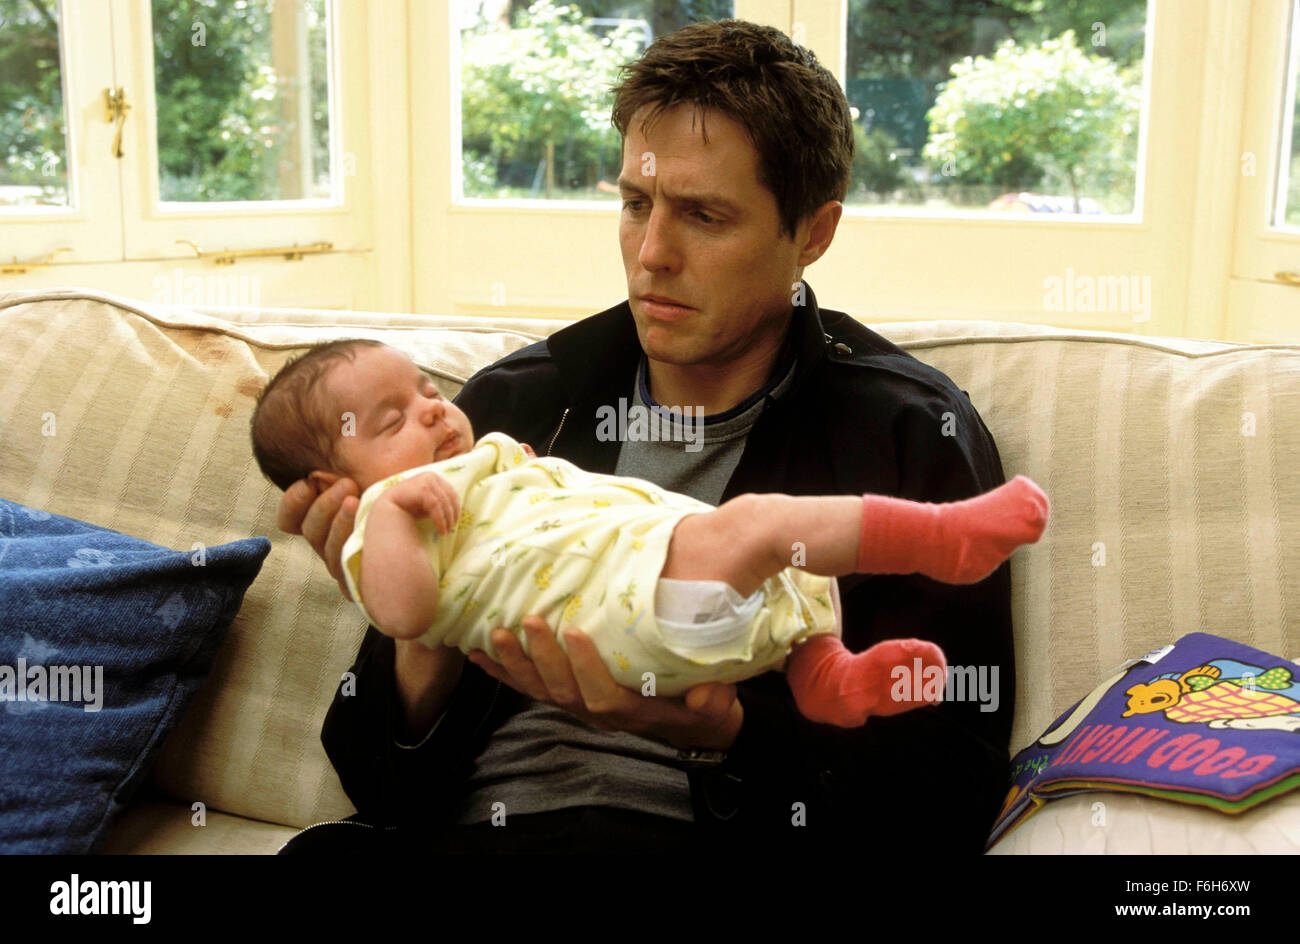 RELEASE DATE: April 26, 2002. MOVIE TITLE: About A Boy. STUDIO: Universal Pictures. PLOT: Based on Nick Hornby's best-selling novel, About A Boy is the story of a cynical, immature young man who is taught how to act like a grown-up by a little boy . PICTURED: HUGH GRANT as Will. Stock Photo